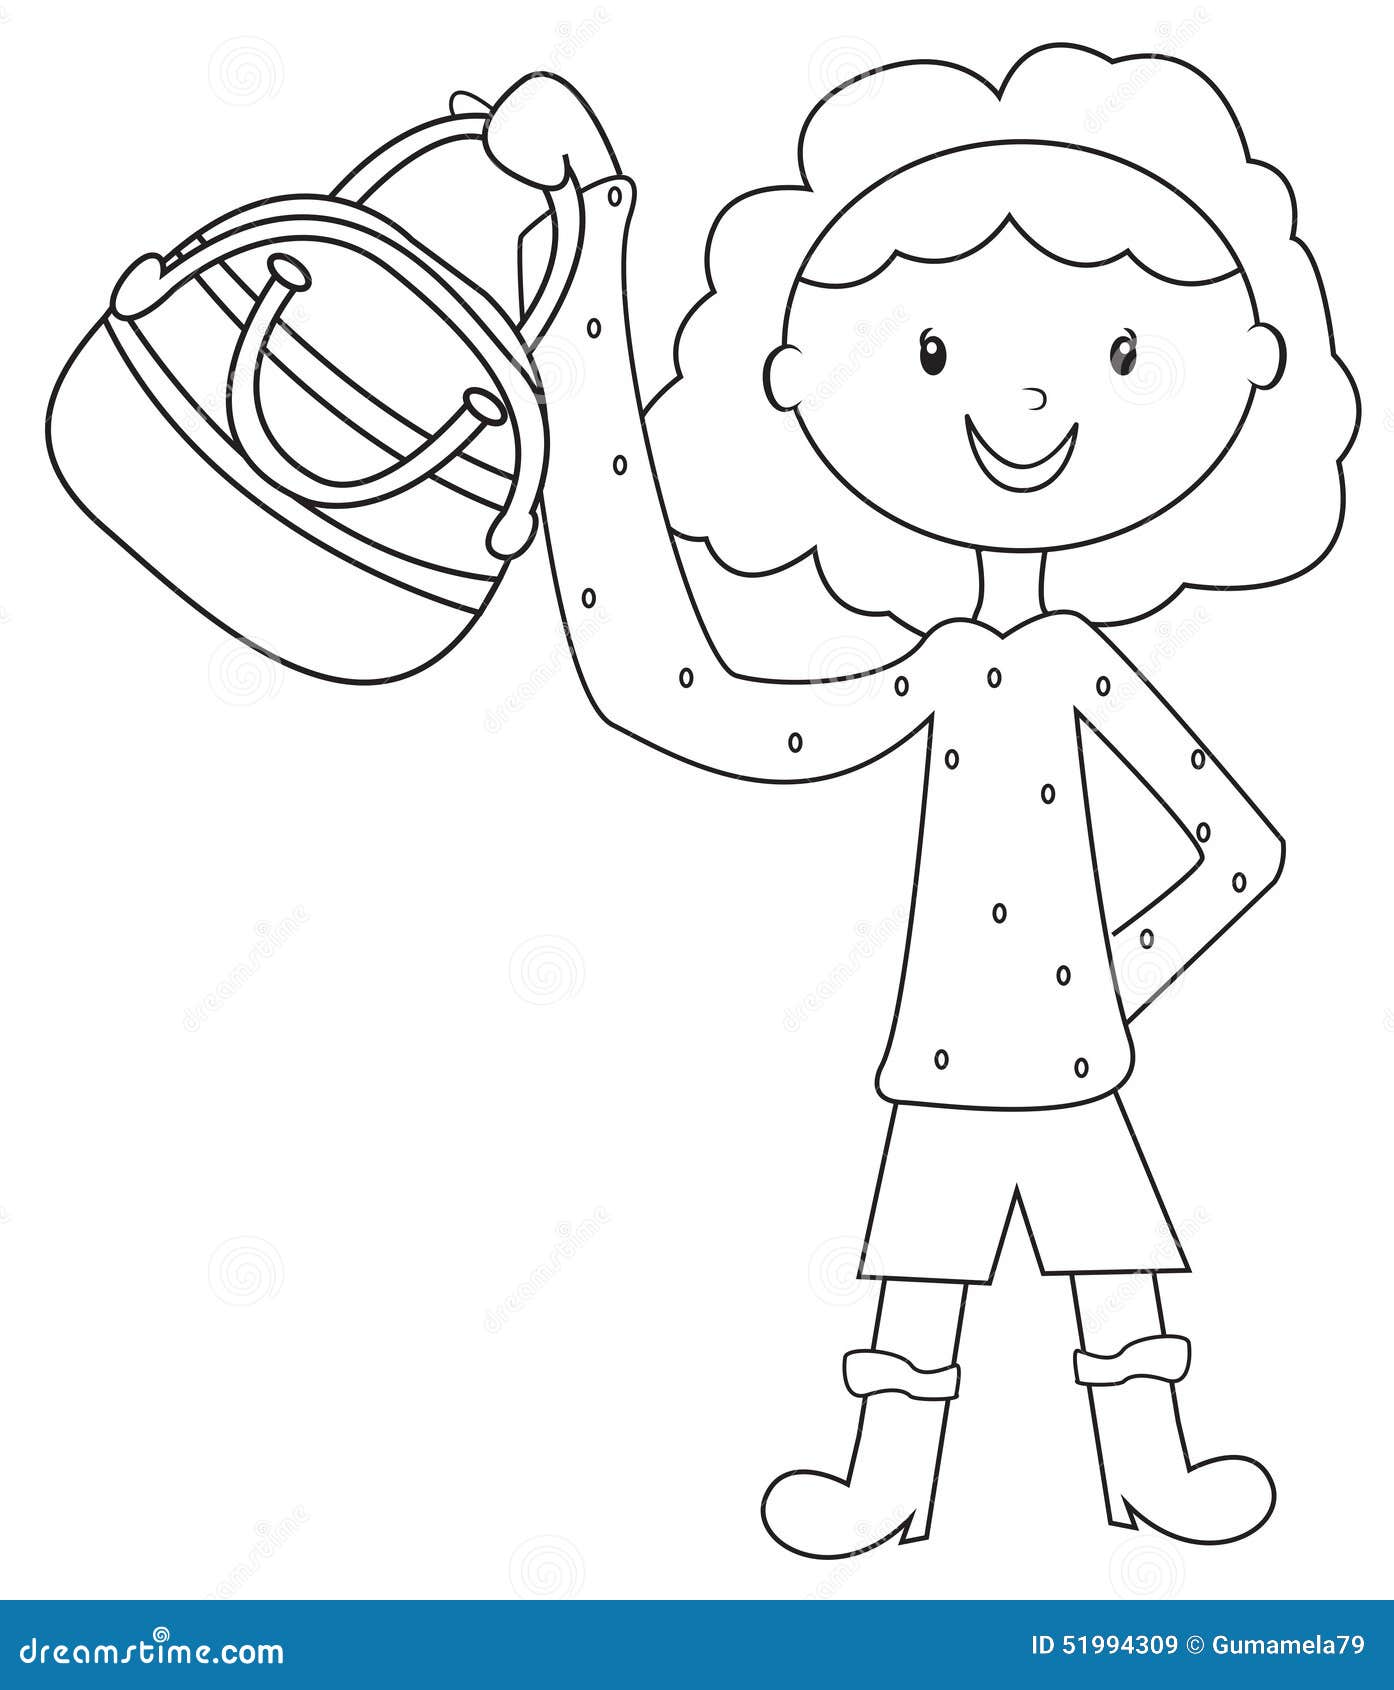 Girl with a Handbag Coloring Page Stock Illustration - Illustration of